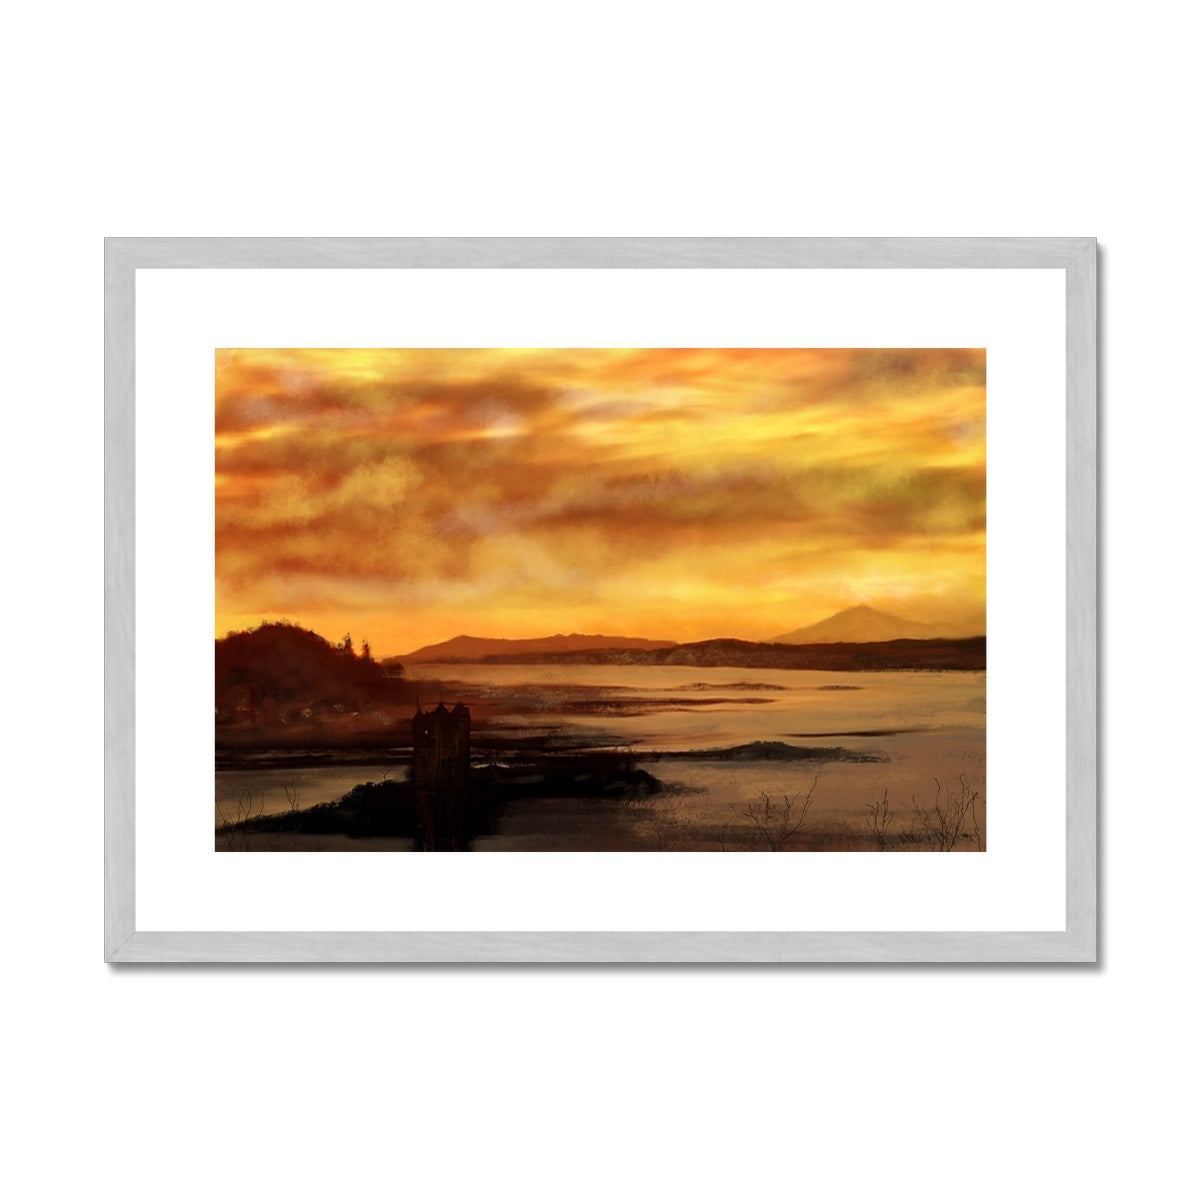 Castle Stalker Dusk Painting | Antique Framed & Mounted Prints From Scotland-Antique Framed & Mounted Prints-Historic & Iconic Scotland Art Gallery-A2 Landscape-Silver Frame-Paintings, Prints, Homeware, Art Gifts From Scotland By Scottish Artist Kevin Hunter